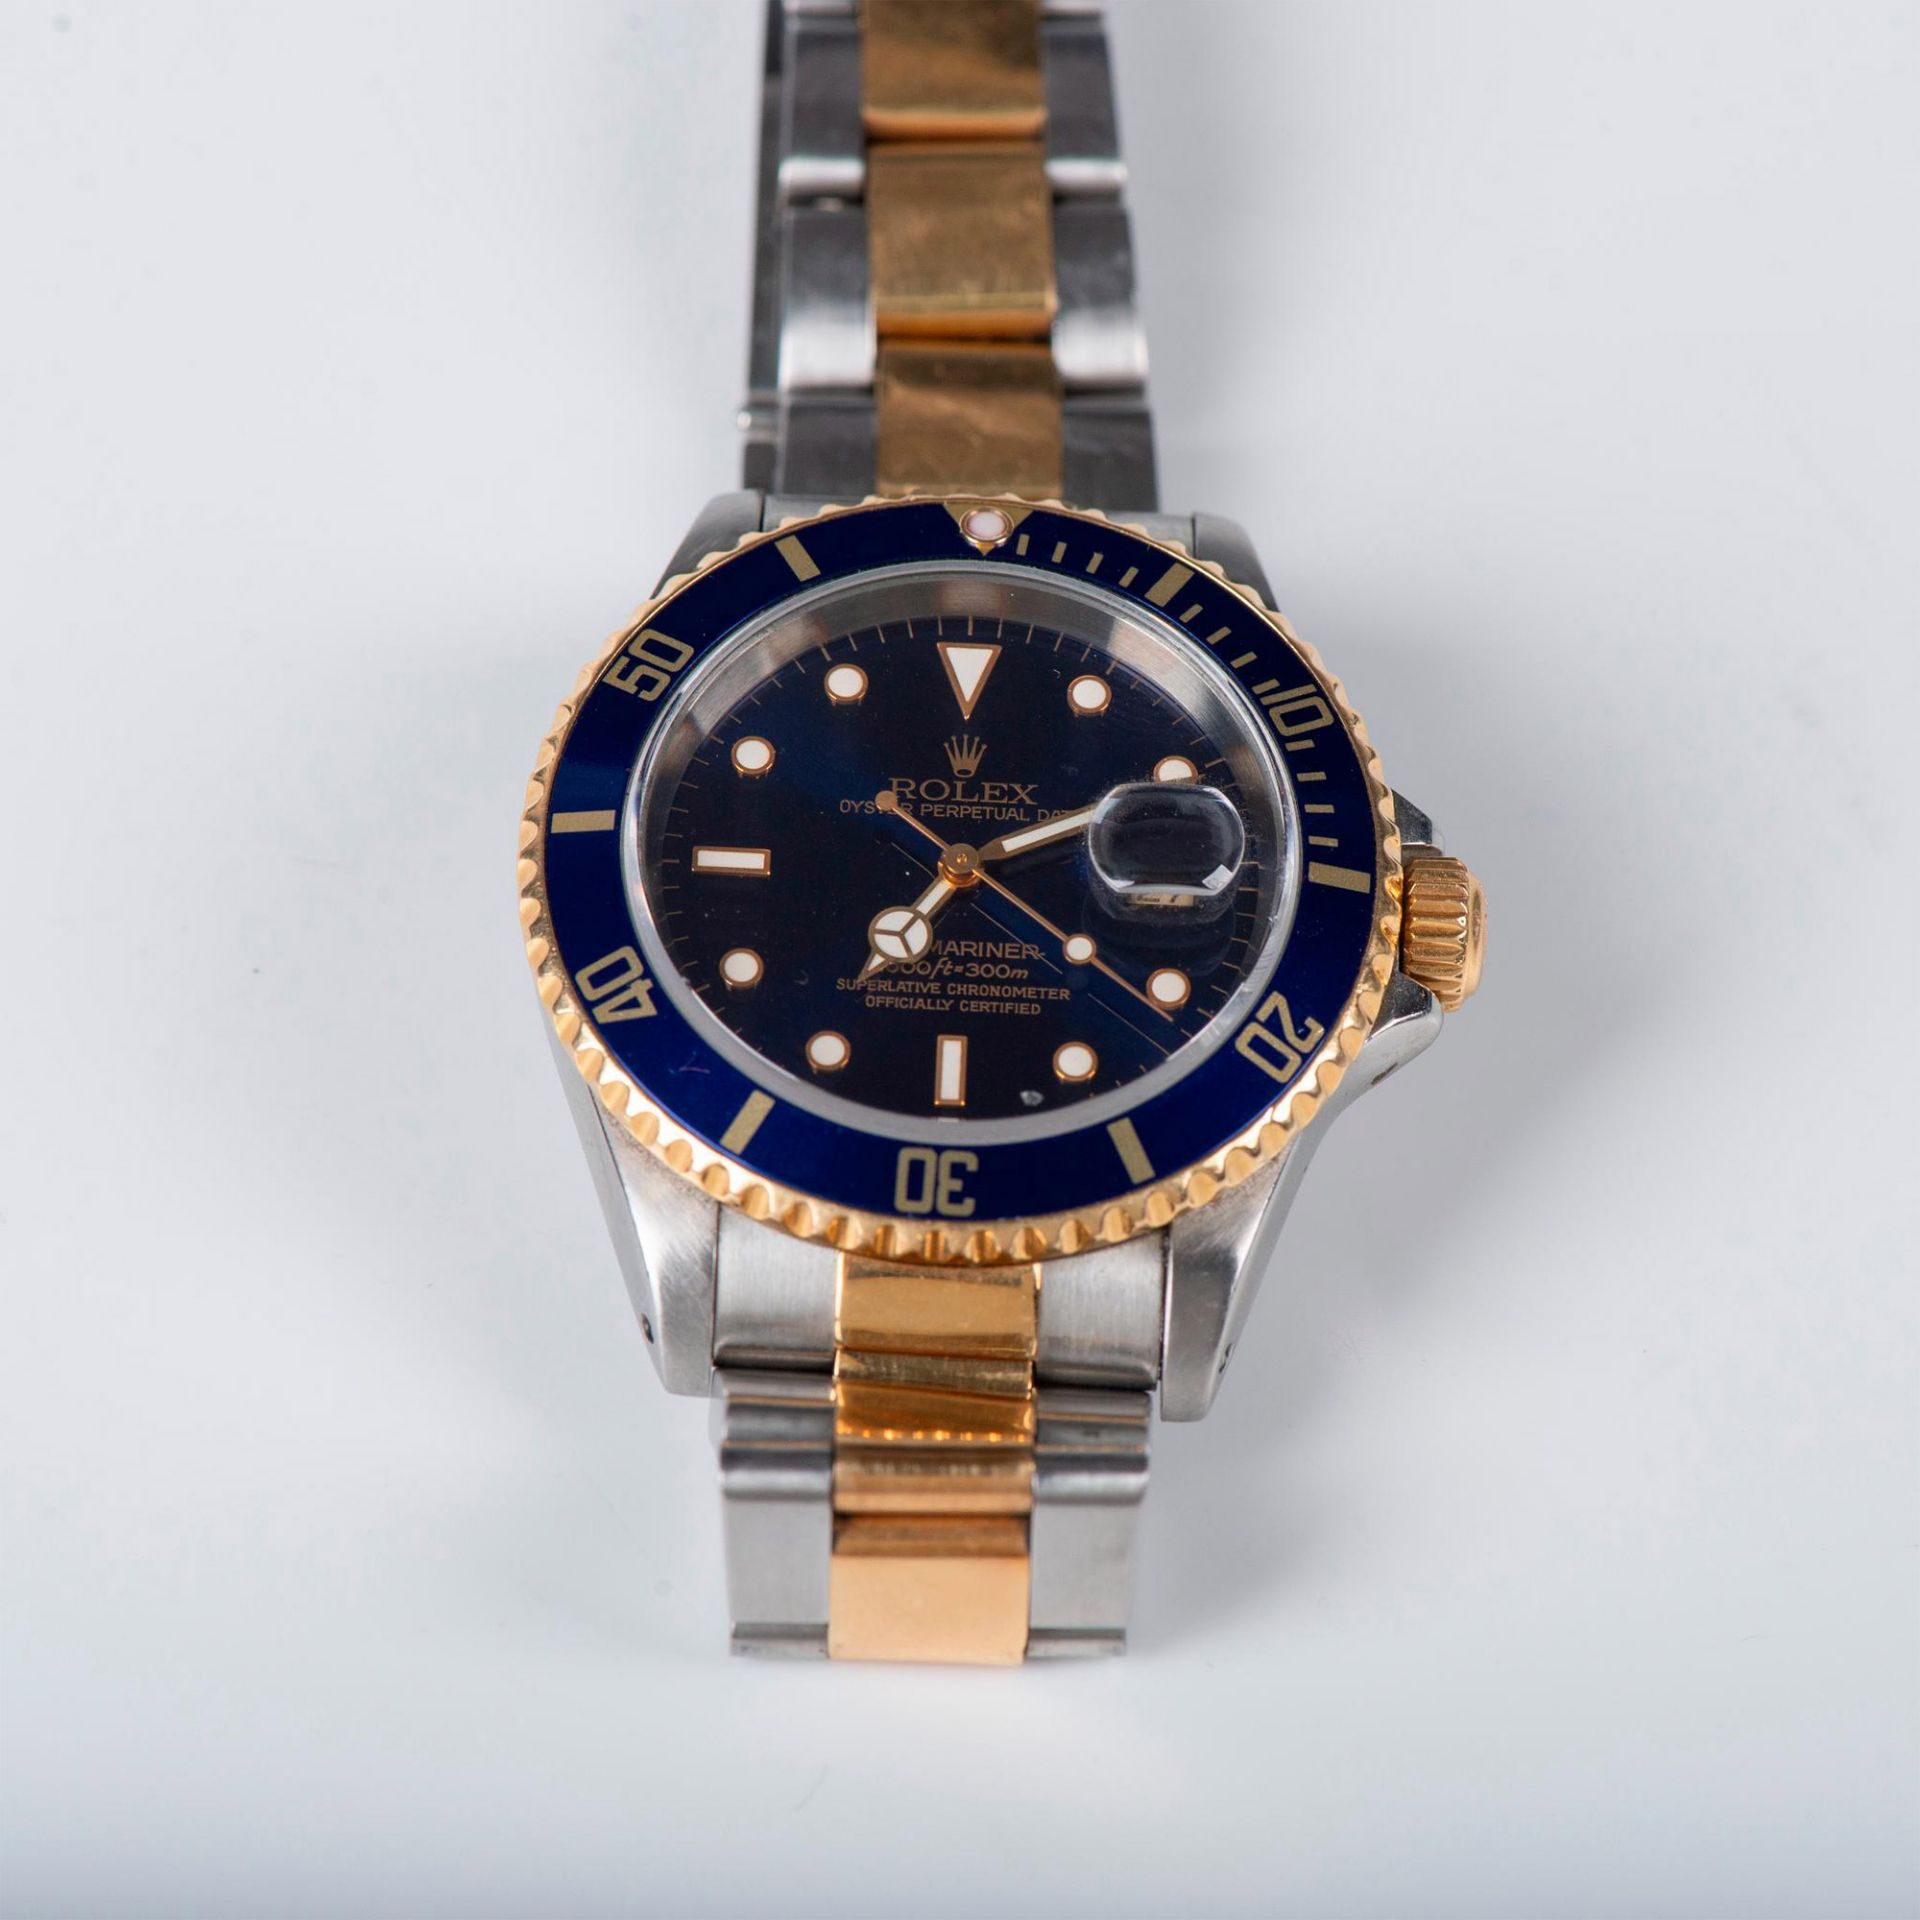 Rolex Submariner Oyster Perpetual Date Watch - Image 2 of 18